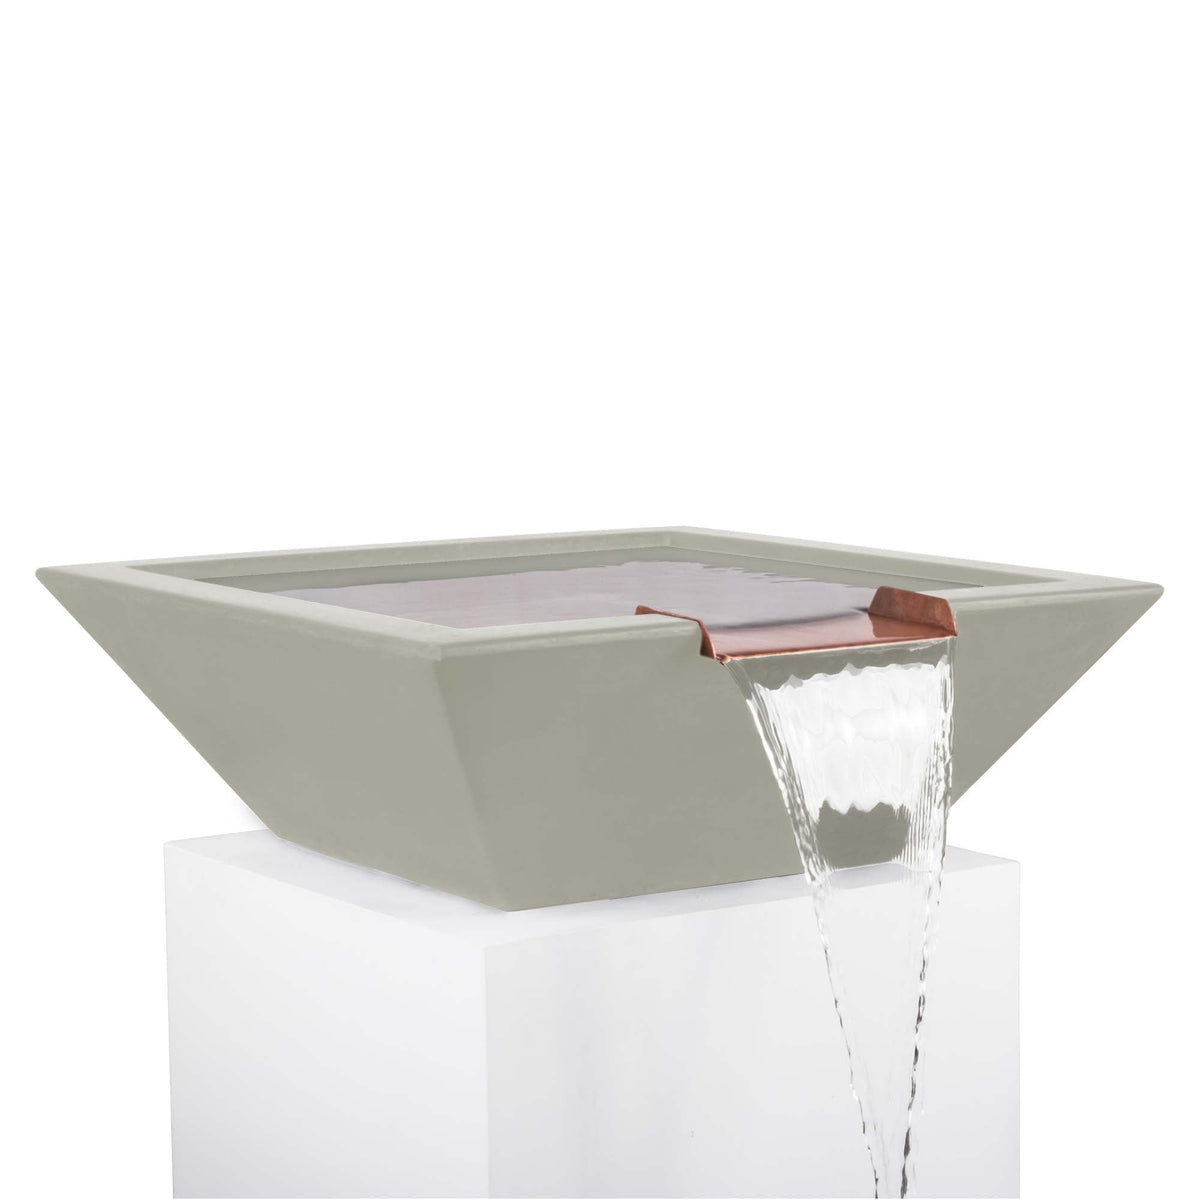 The Outdoor Plus Maya GFRC Concrete Square Water Bowl in Ash